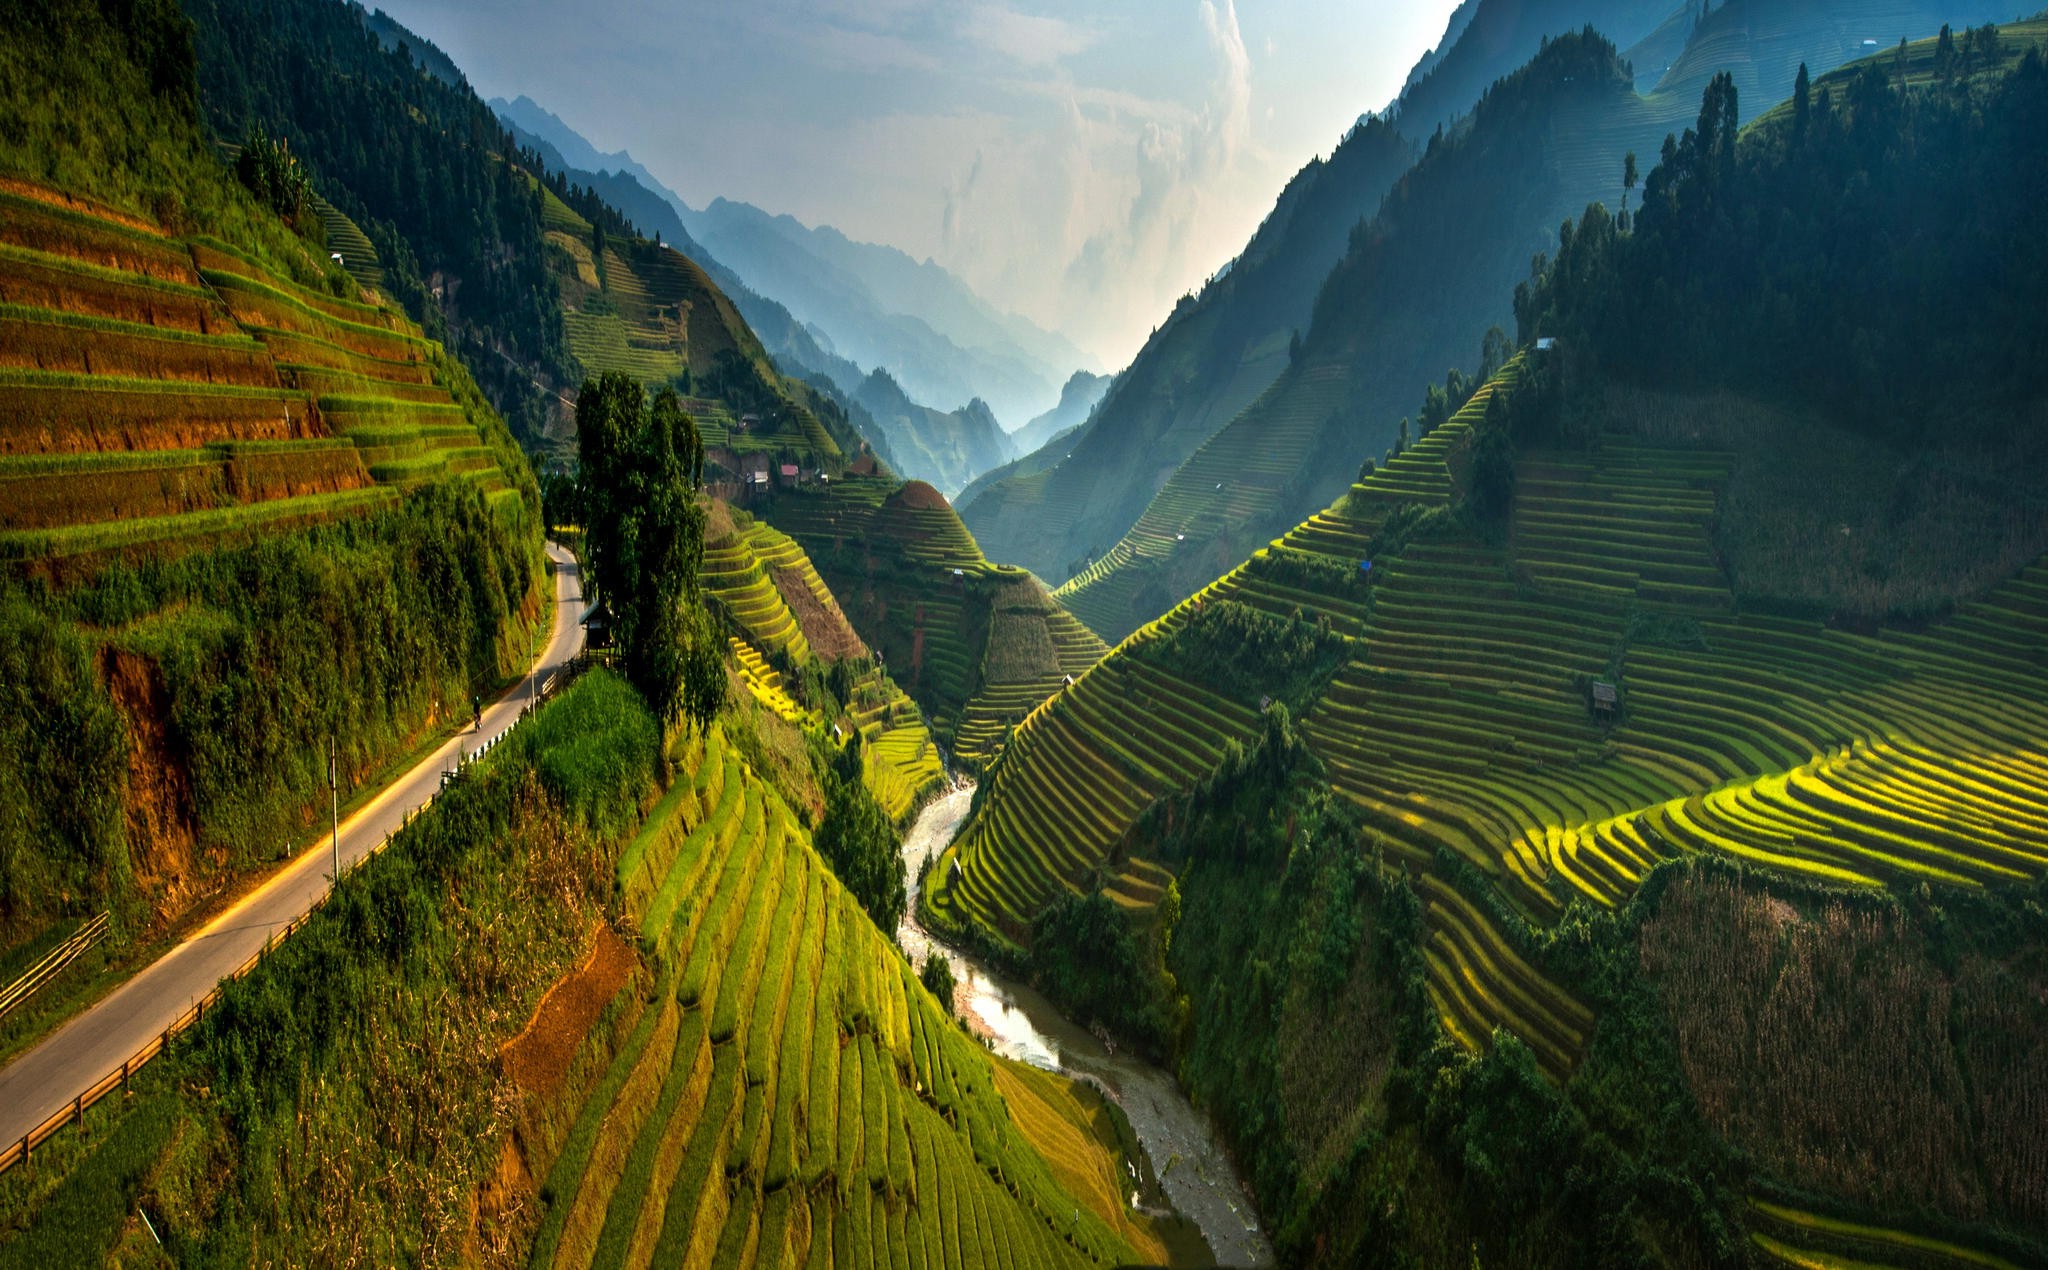 rice Paddy, Terraces, Valley, Vietnam, Mountain, Road, Mist, River, Green, Trees, Spring, Landscape, Nature Wallpaper